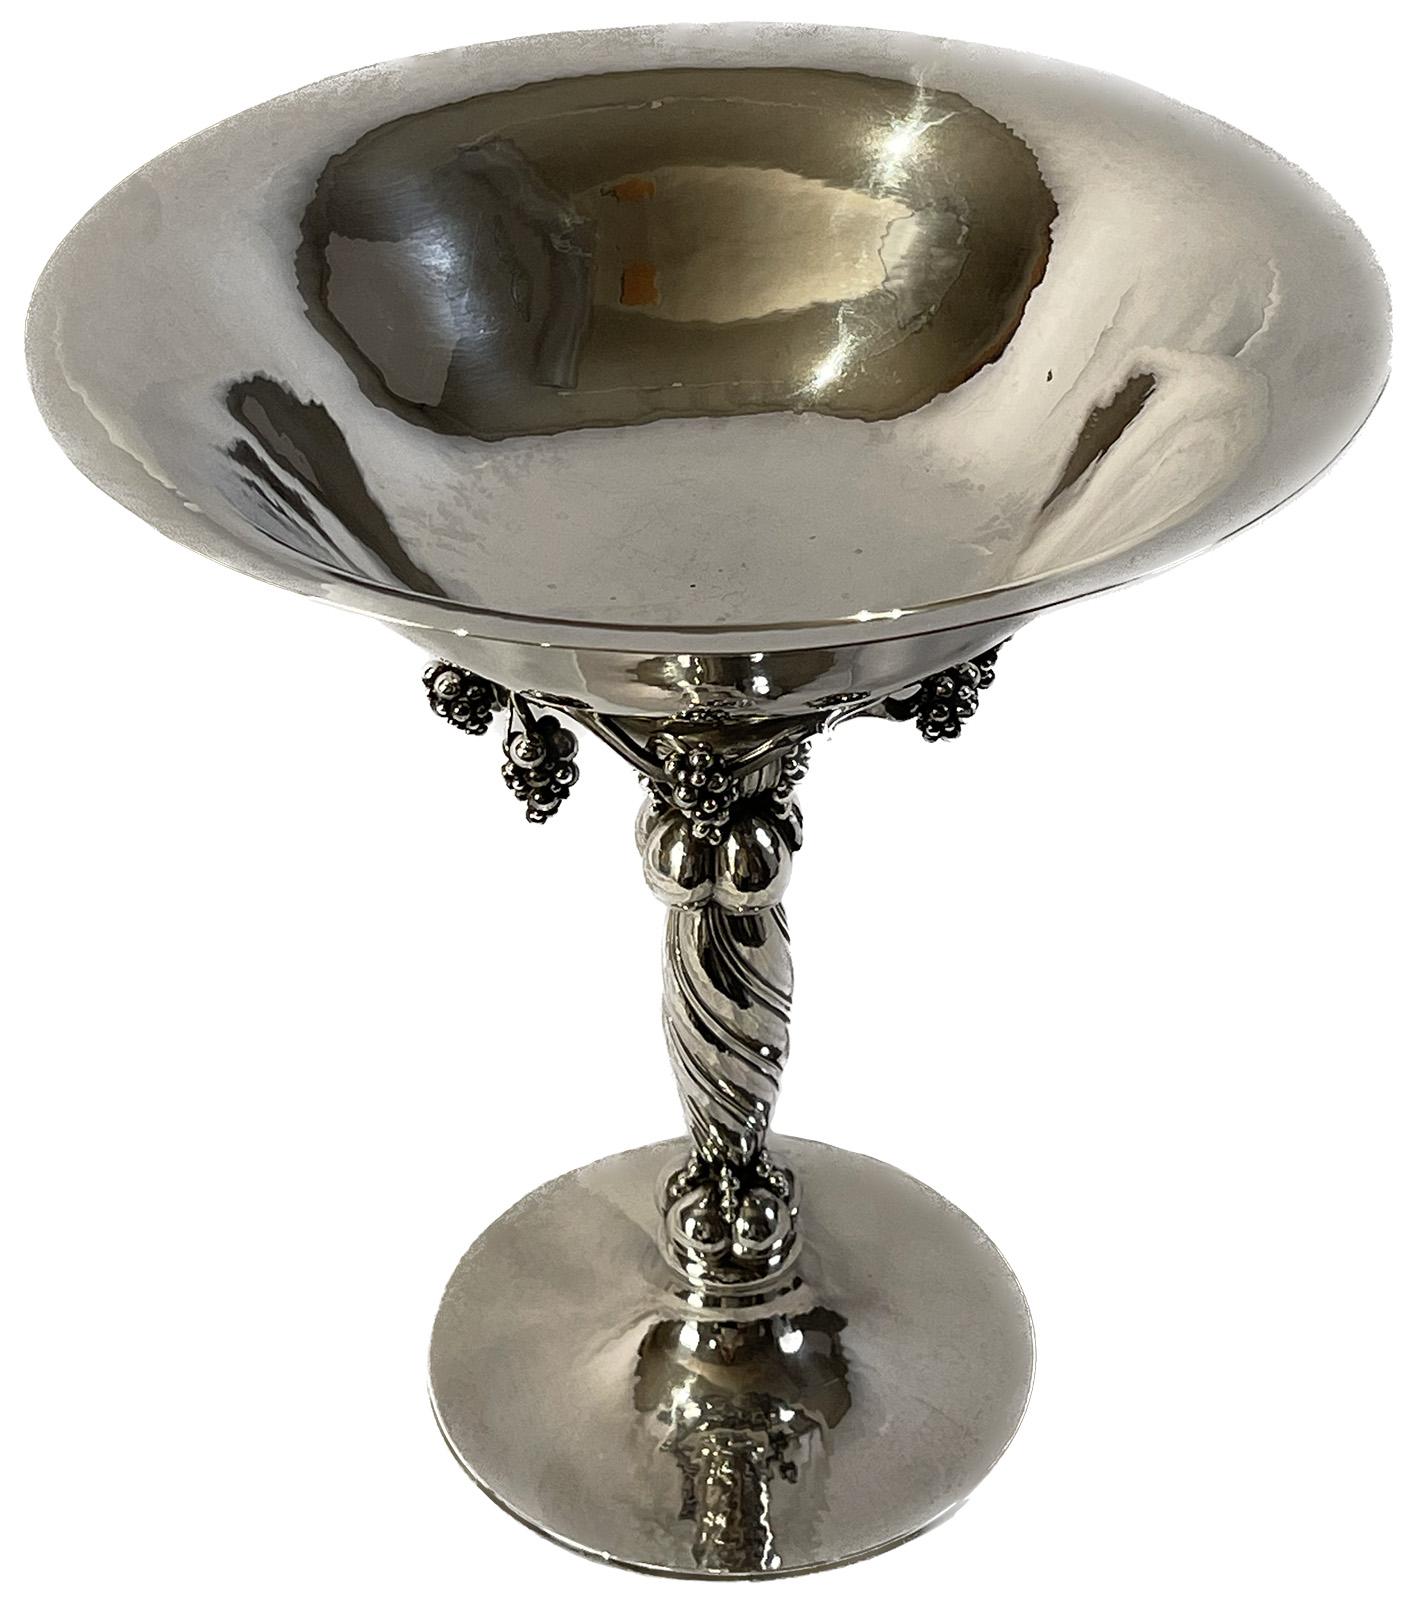 A Georg Jensen (Denmark, 1866 - 1935) sterling silver compote numbered 264 at base with Georg Jensen logo.